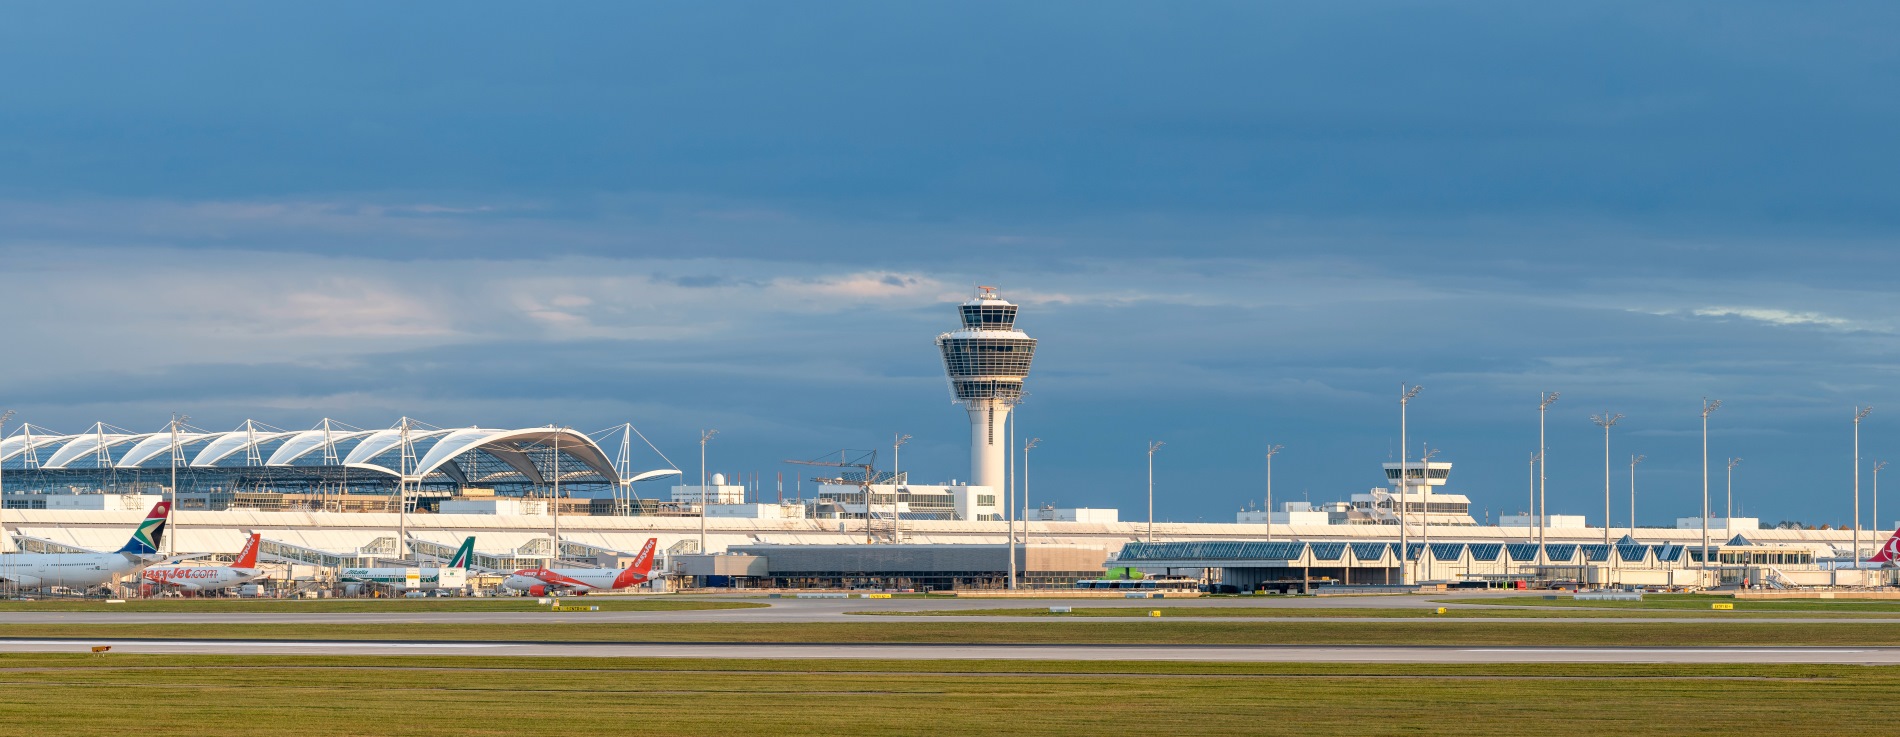 picture showing Munich Airport, including Tower and Airplanes; copyright Shutterstock